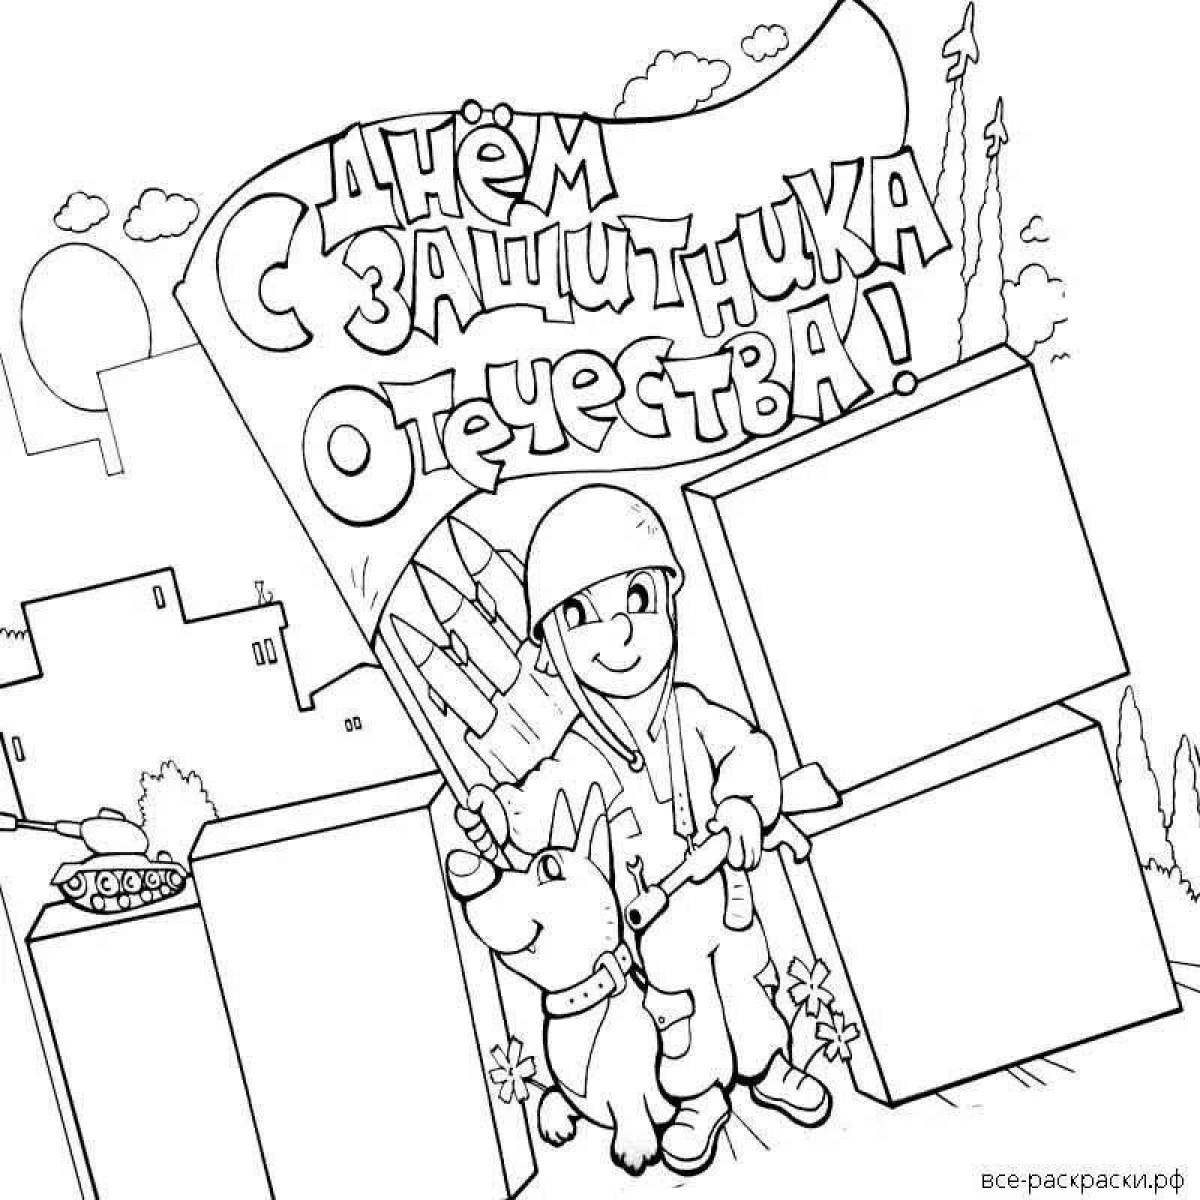 Coloring page radiant congratulations